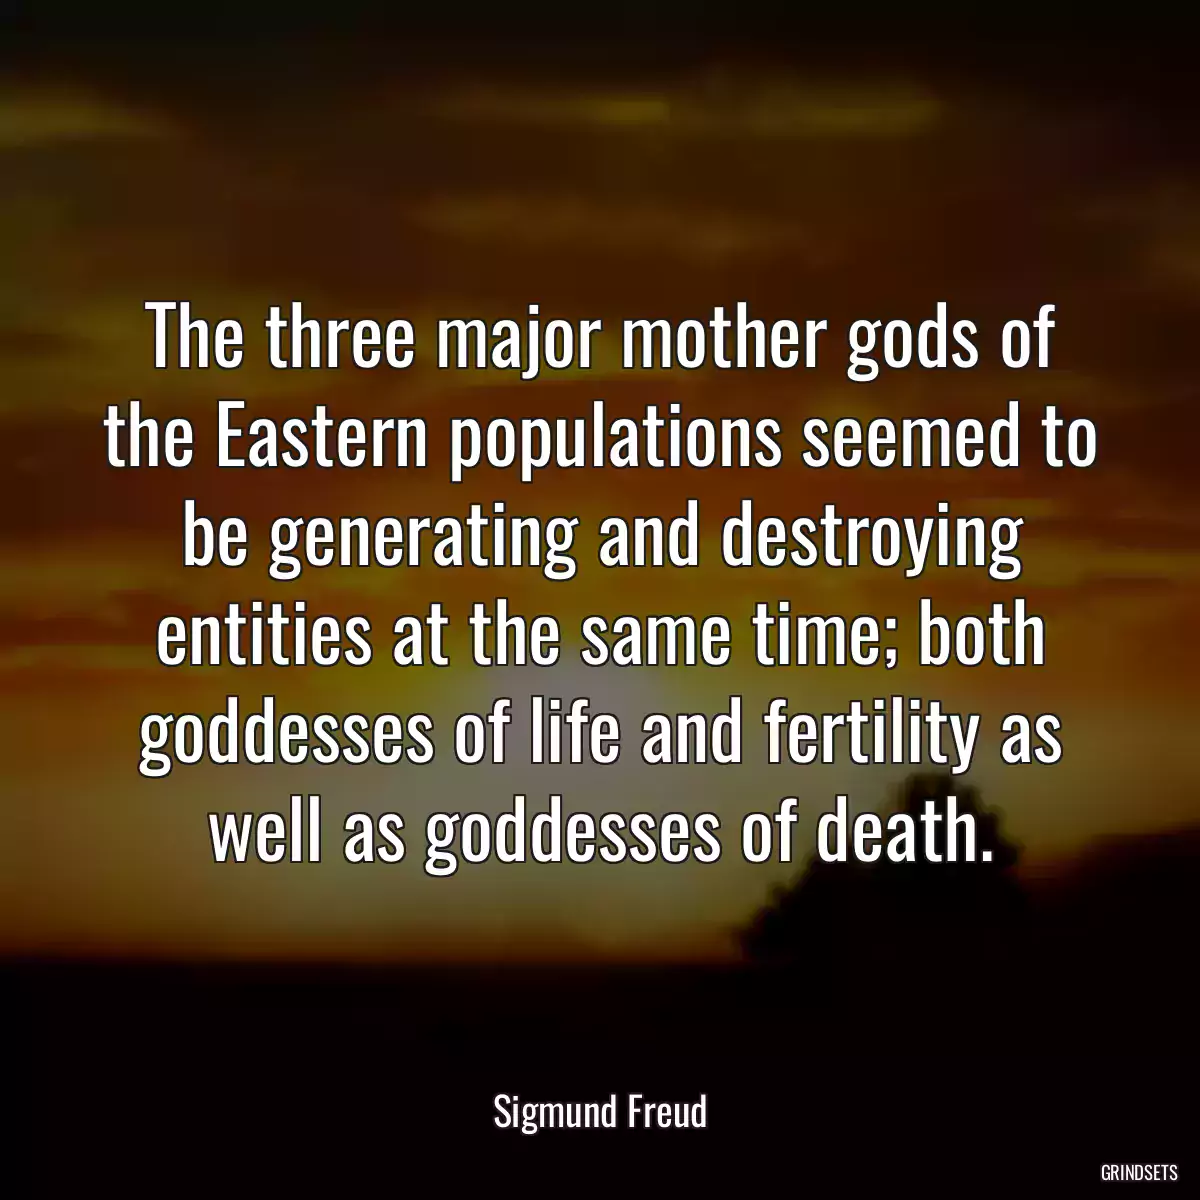 The three major mother gods of the Eastern populations seemed to be generating and destroying entities at the same time; both goddesses of life and fertility as well as goddesses of death.